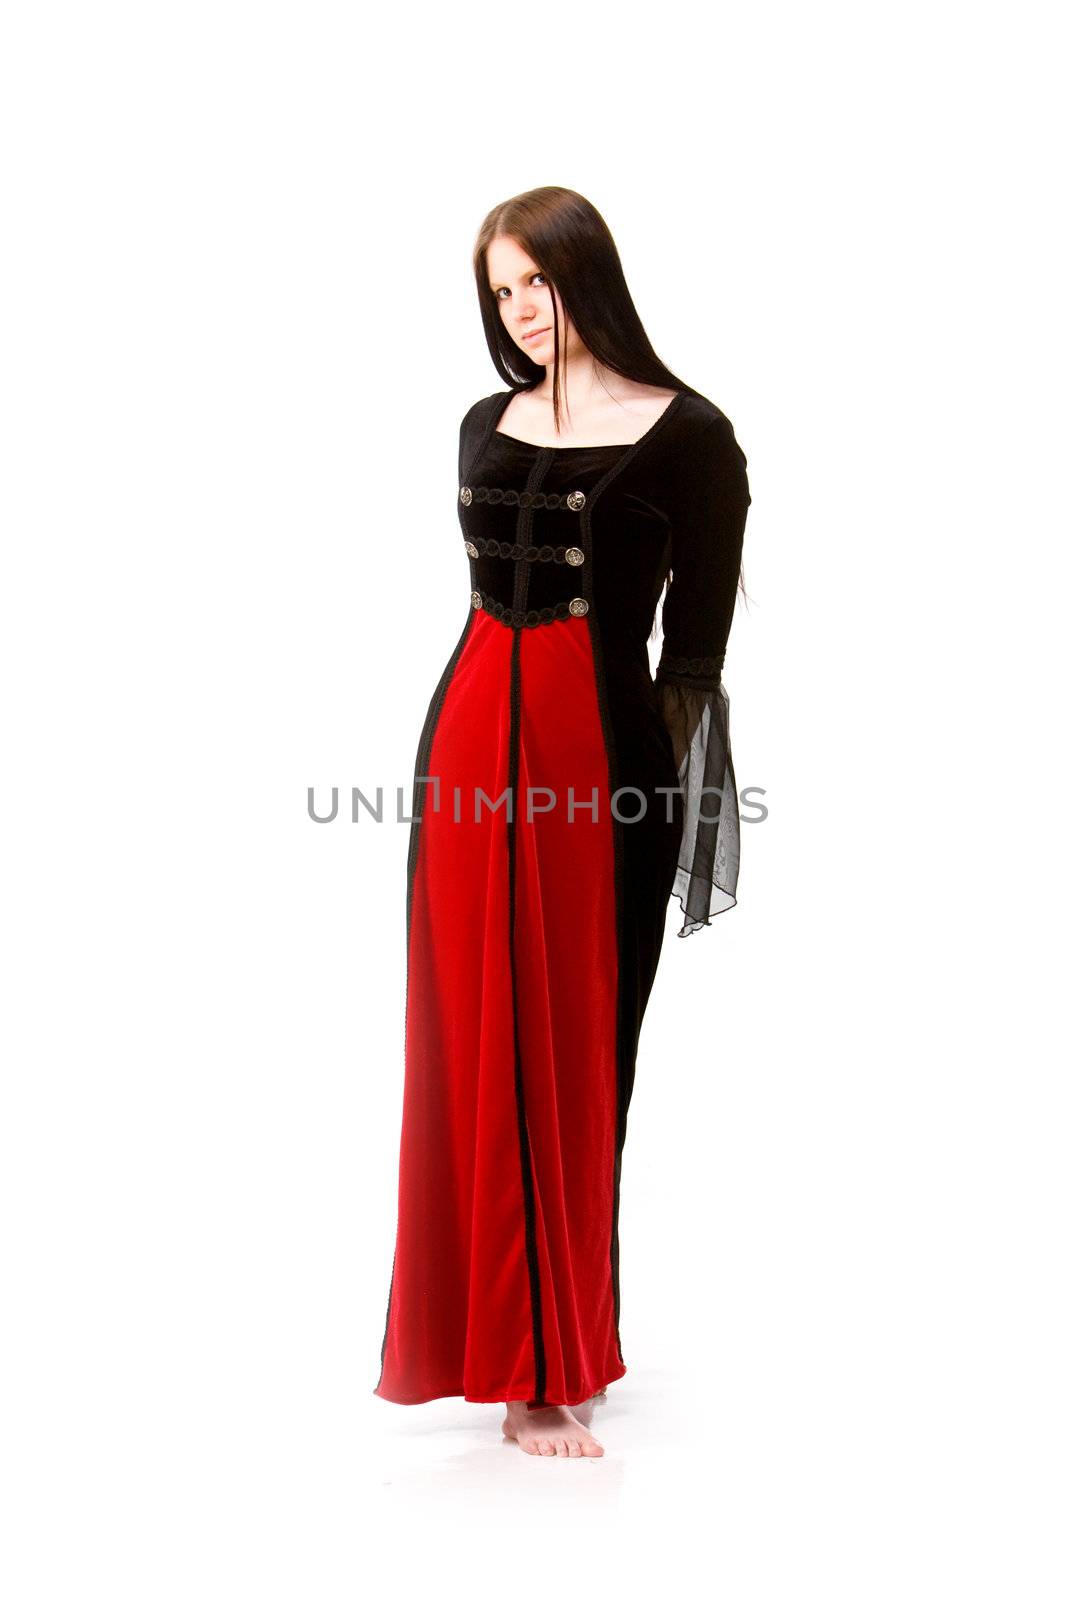 pretty girl in red gothic dress